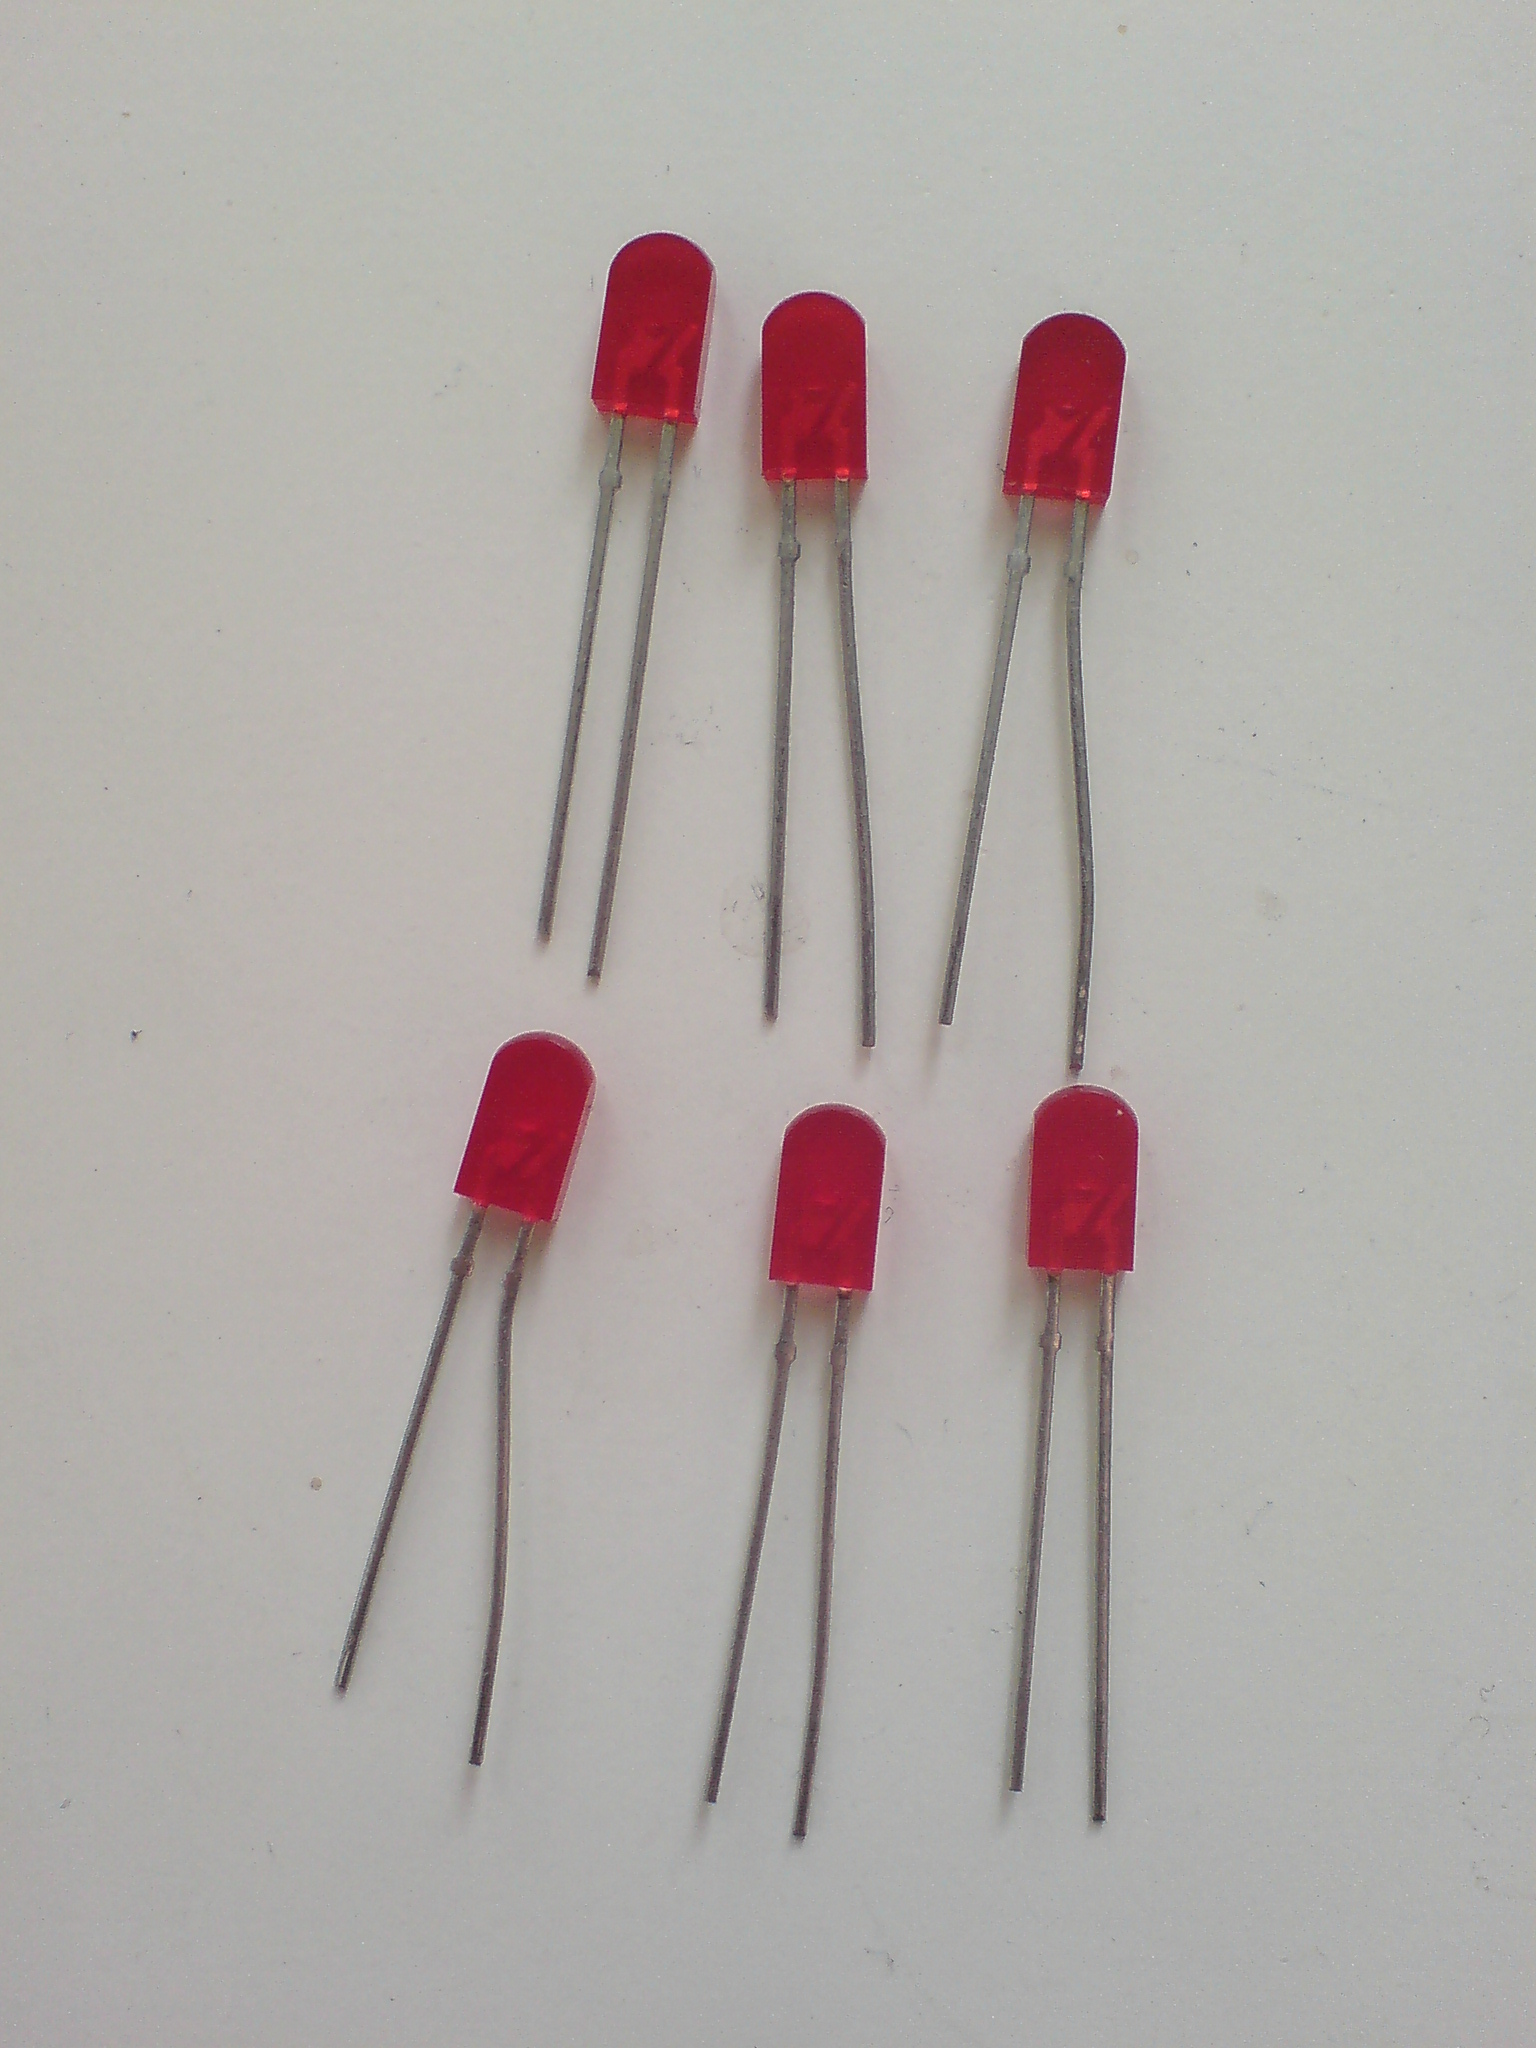 ... and some diodes (here light-emitting diodes)